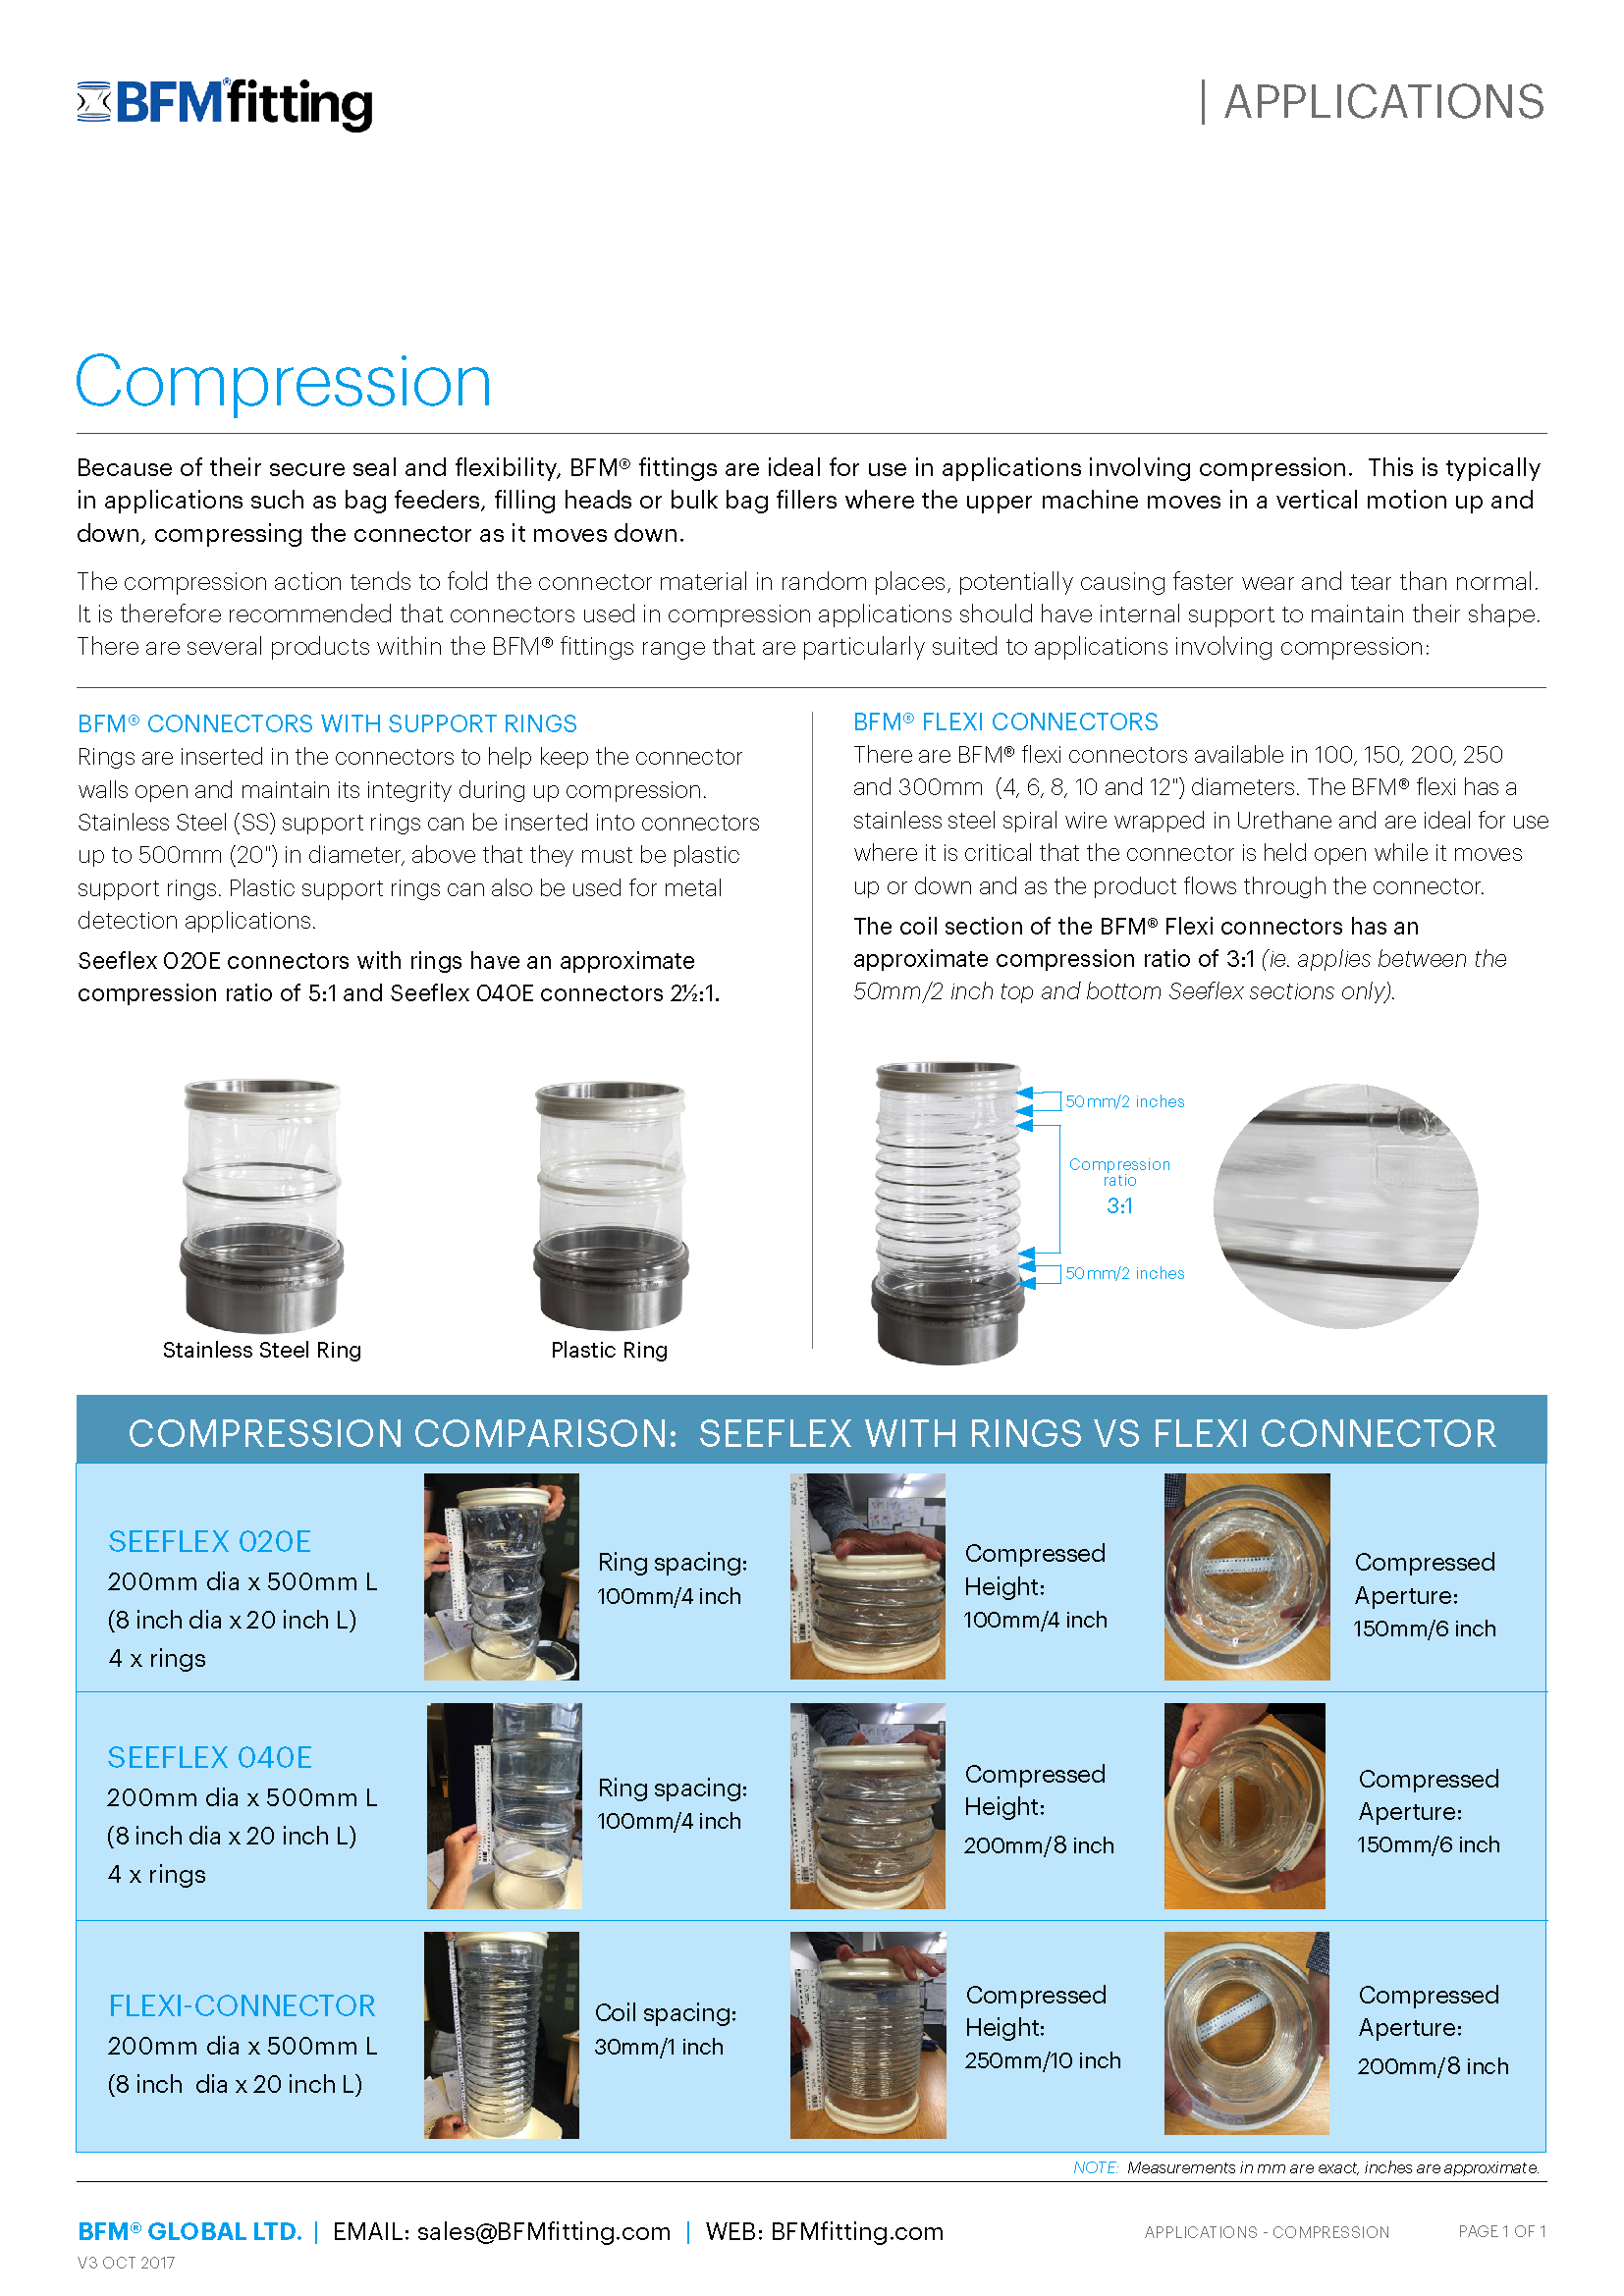 BFM Fitting Compression Applications